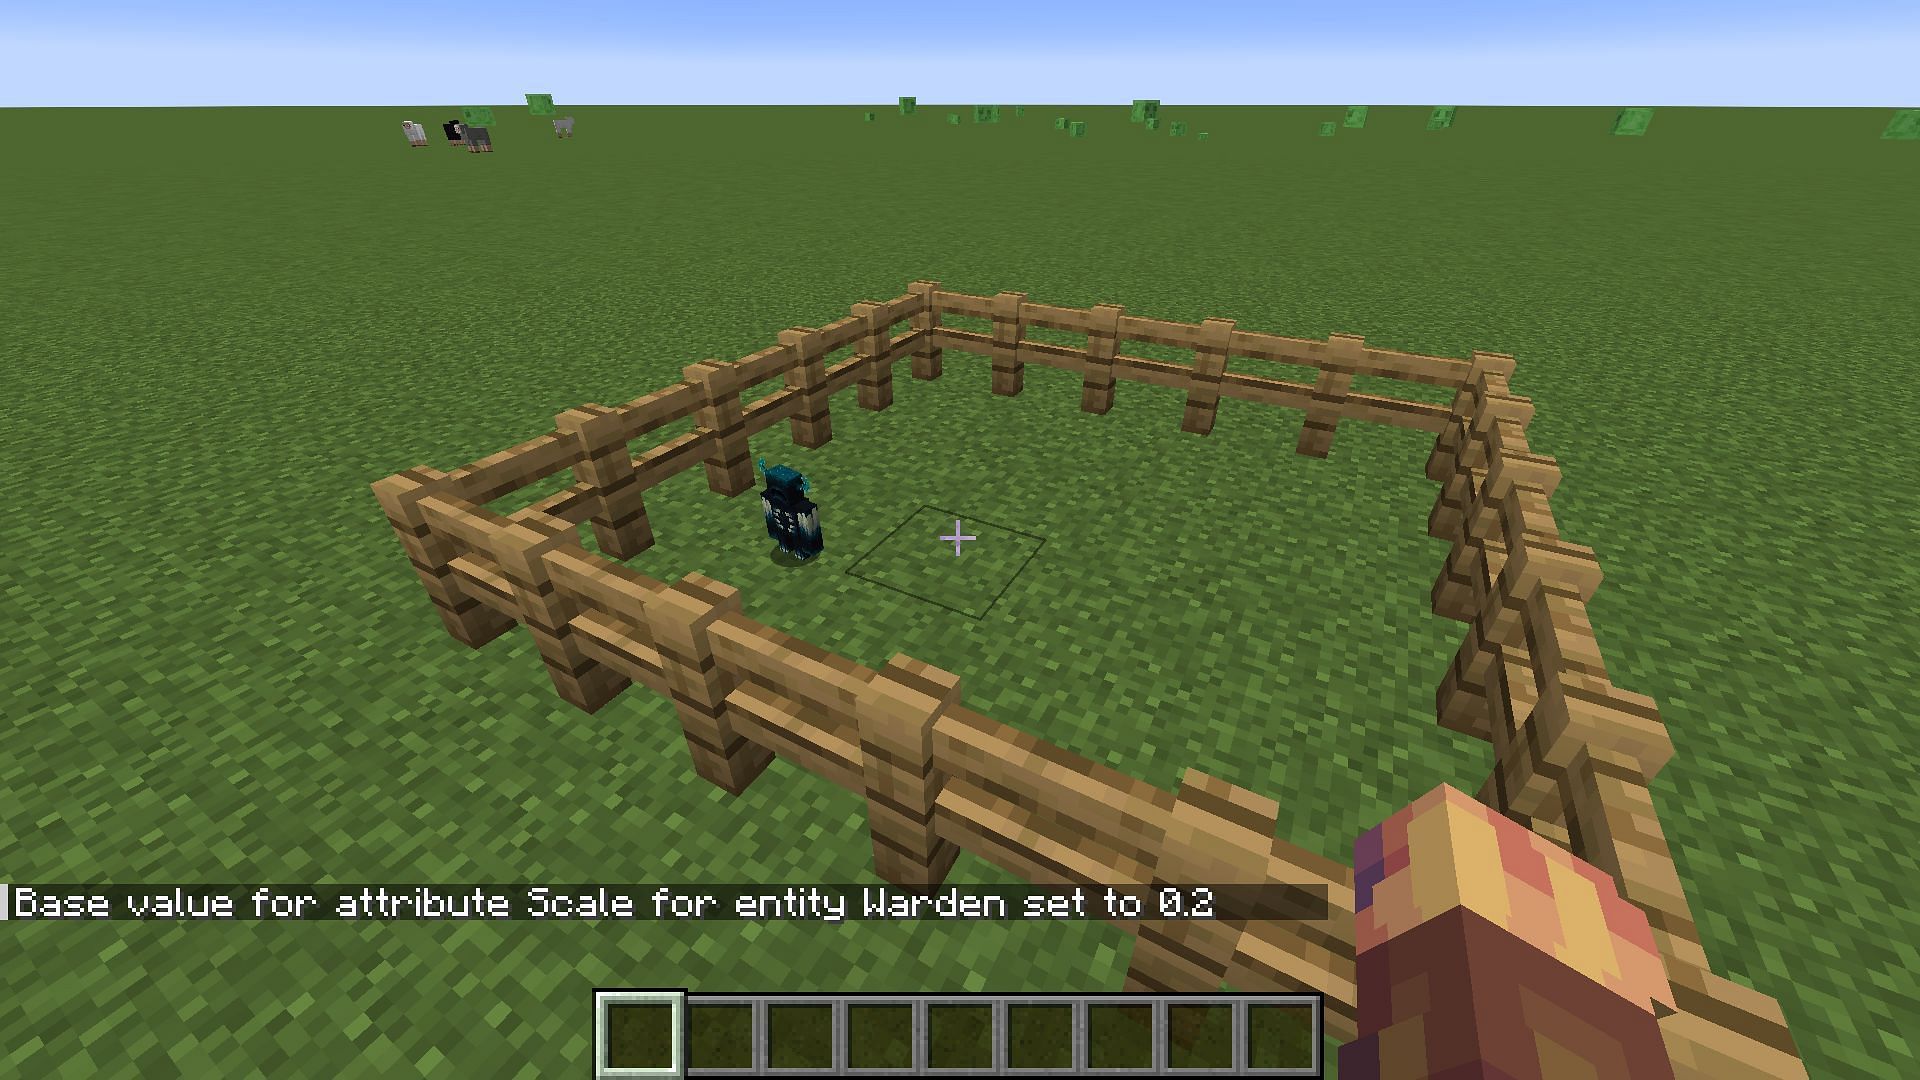 The attribute command is used to make a small Warden in Minecraft (Image via Mojang)